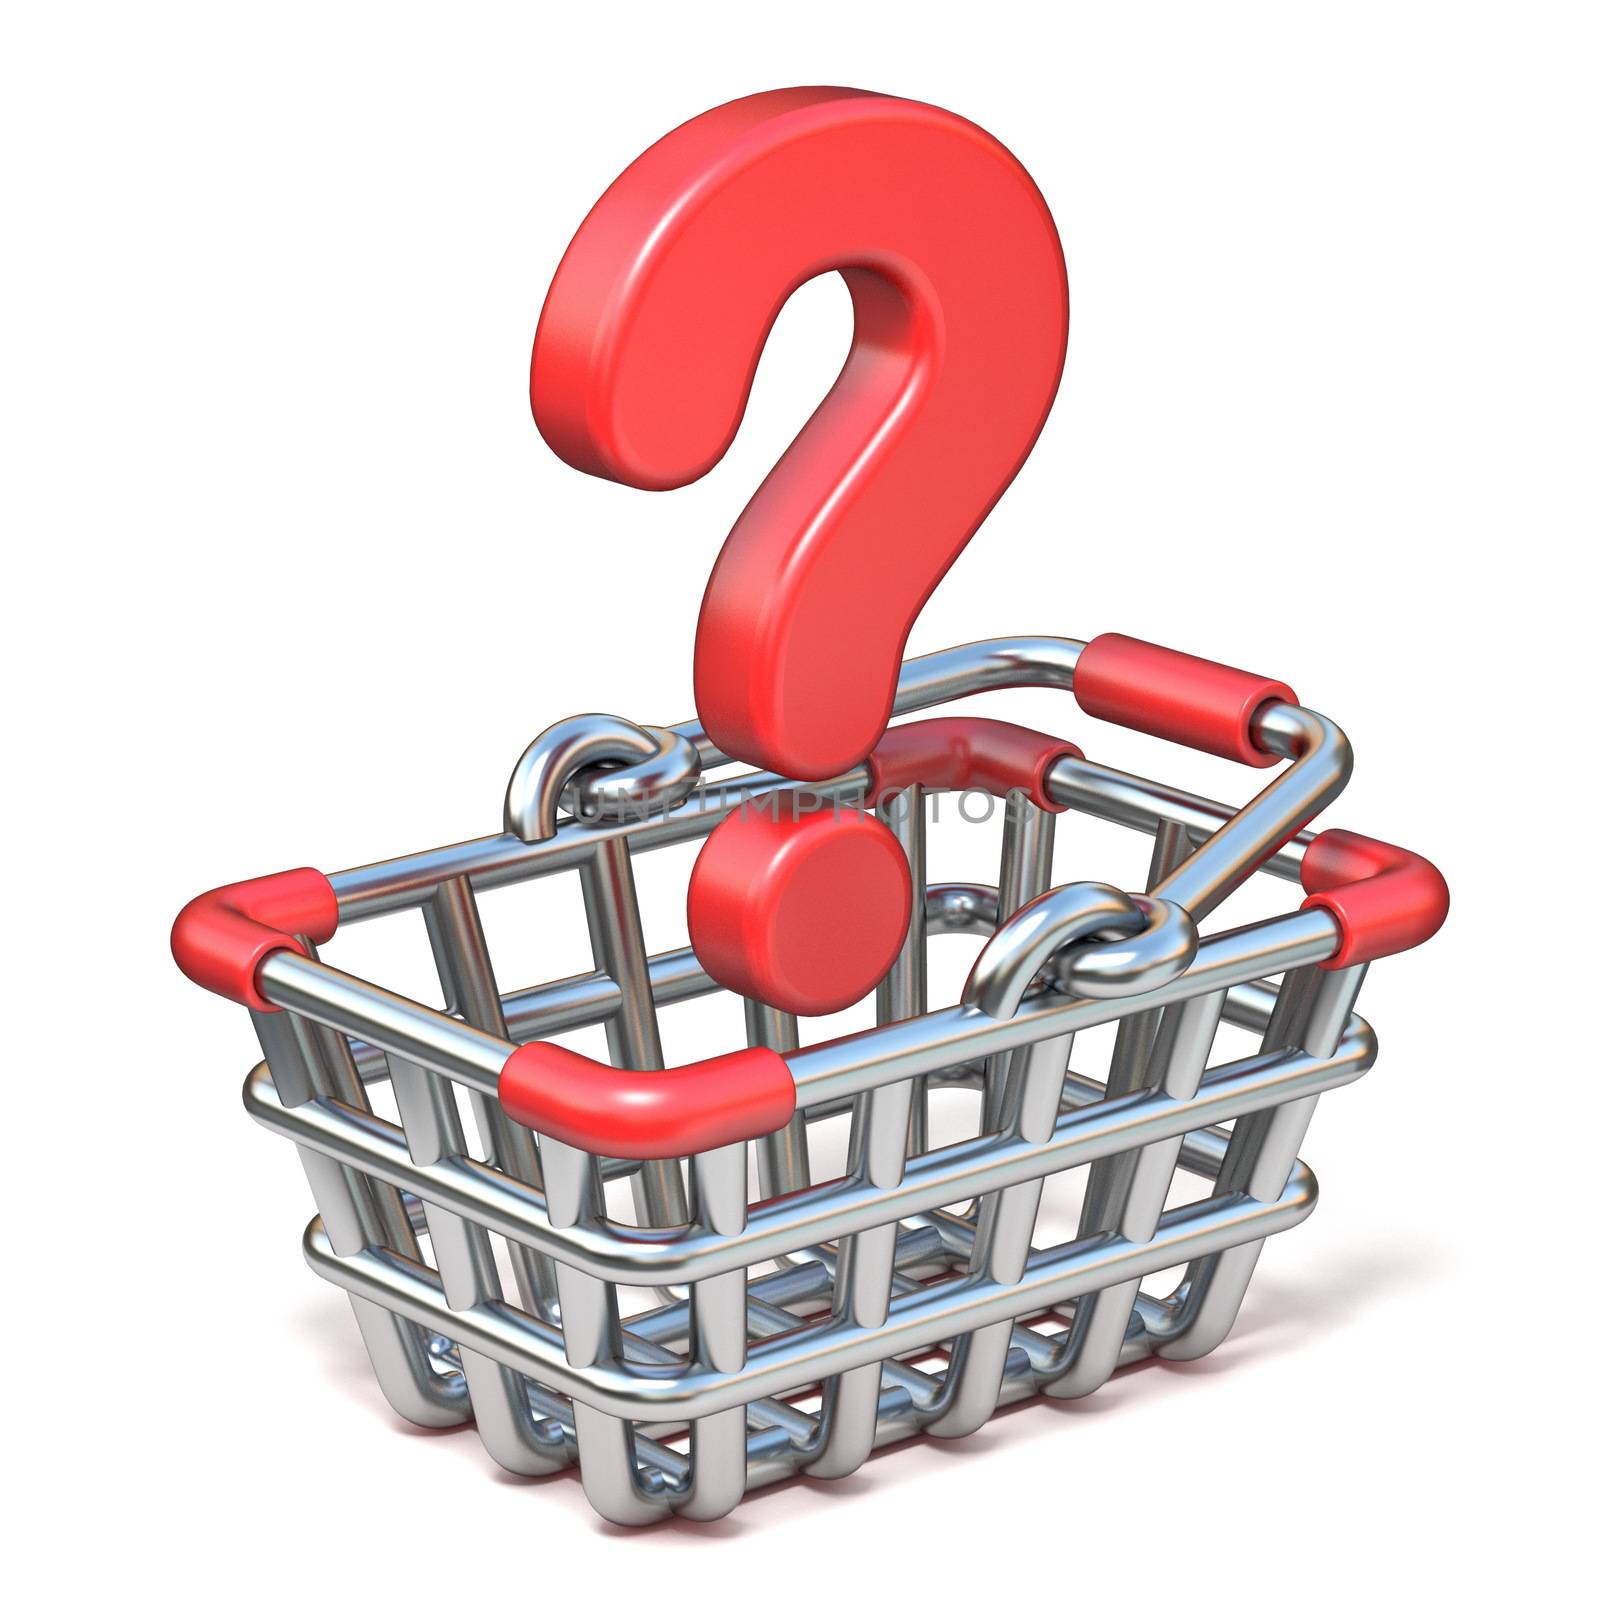 Shopping basket and red question mark 3D render illustration isolated on white background